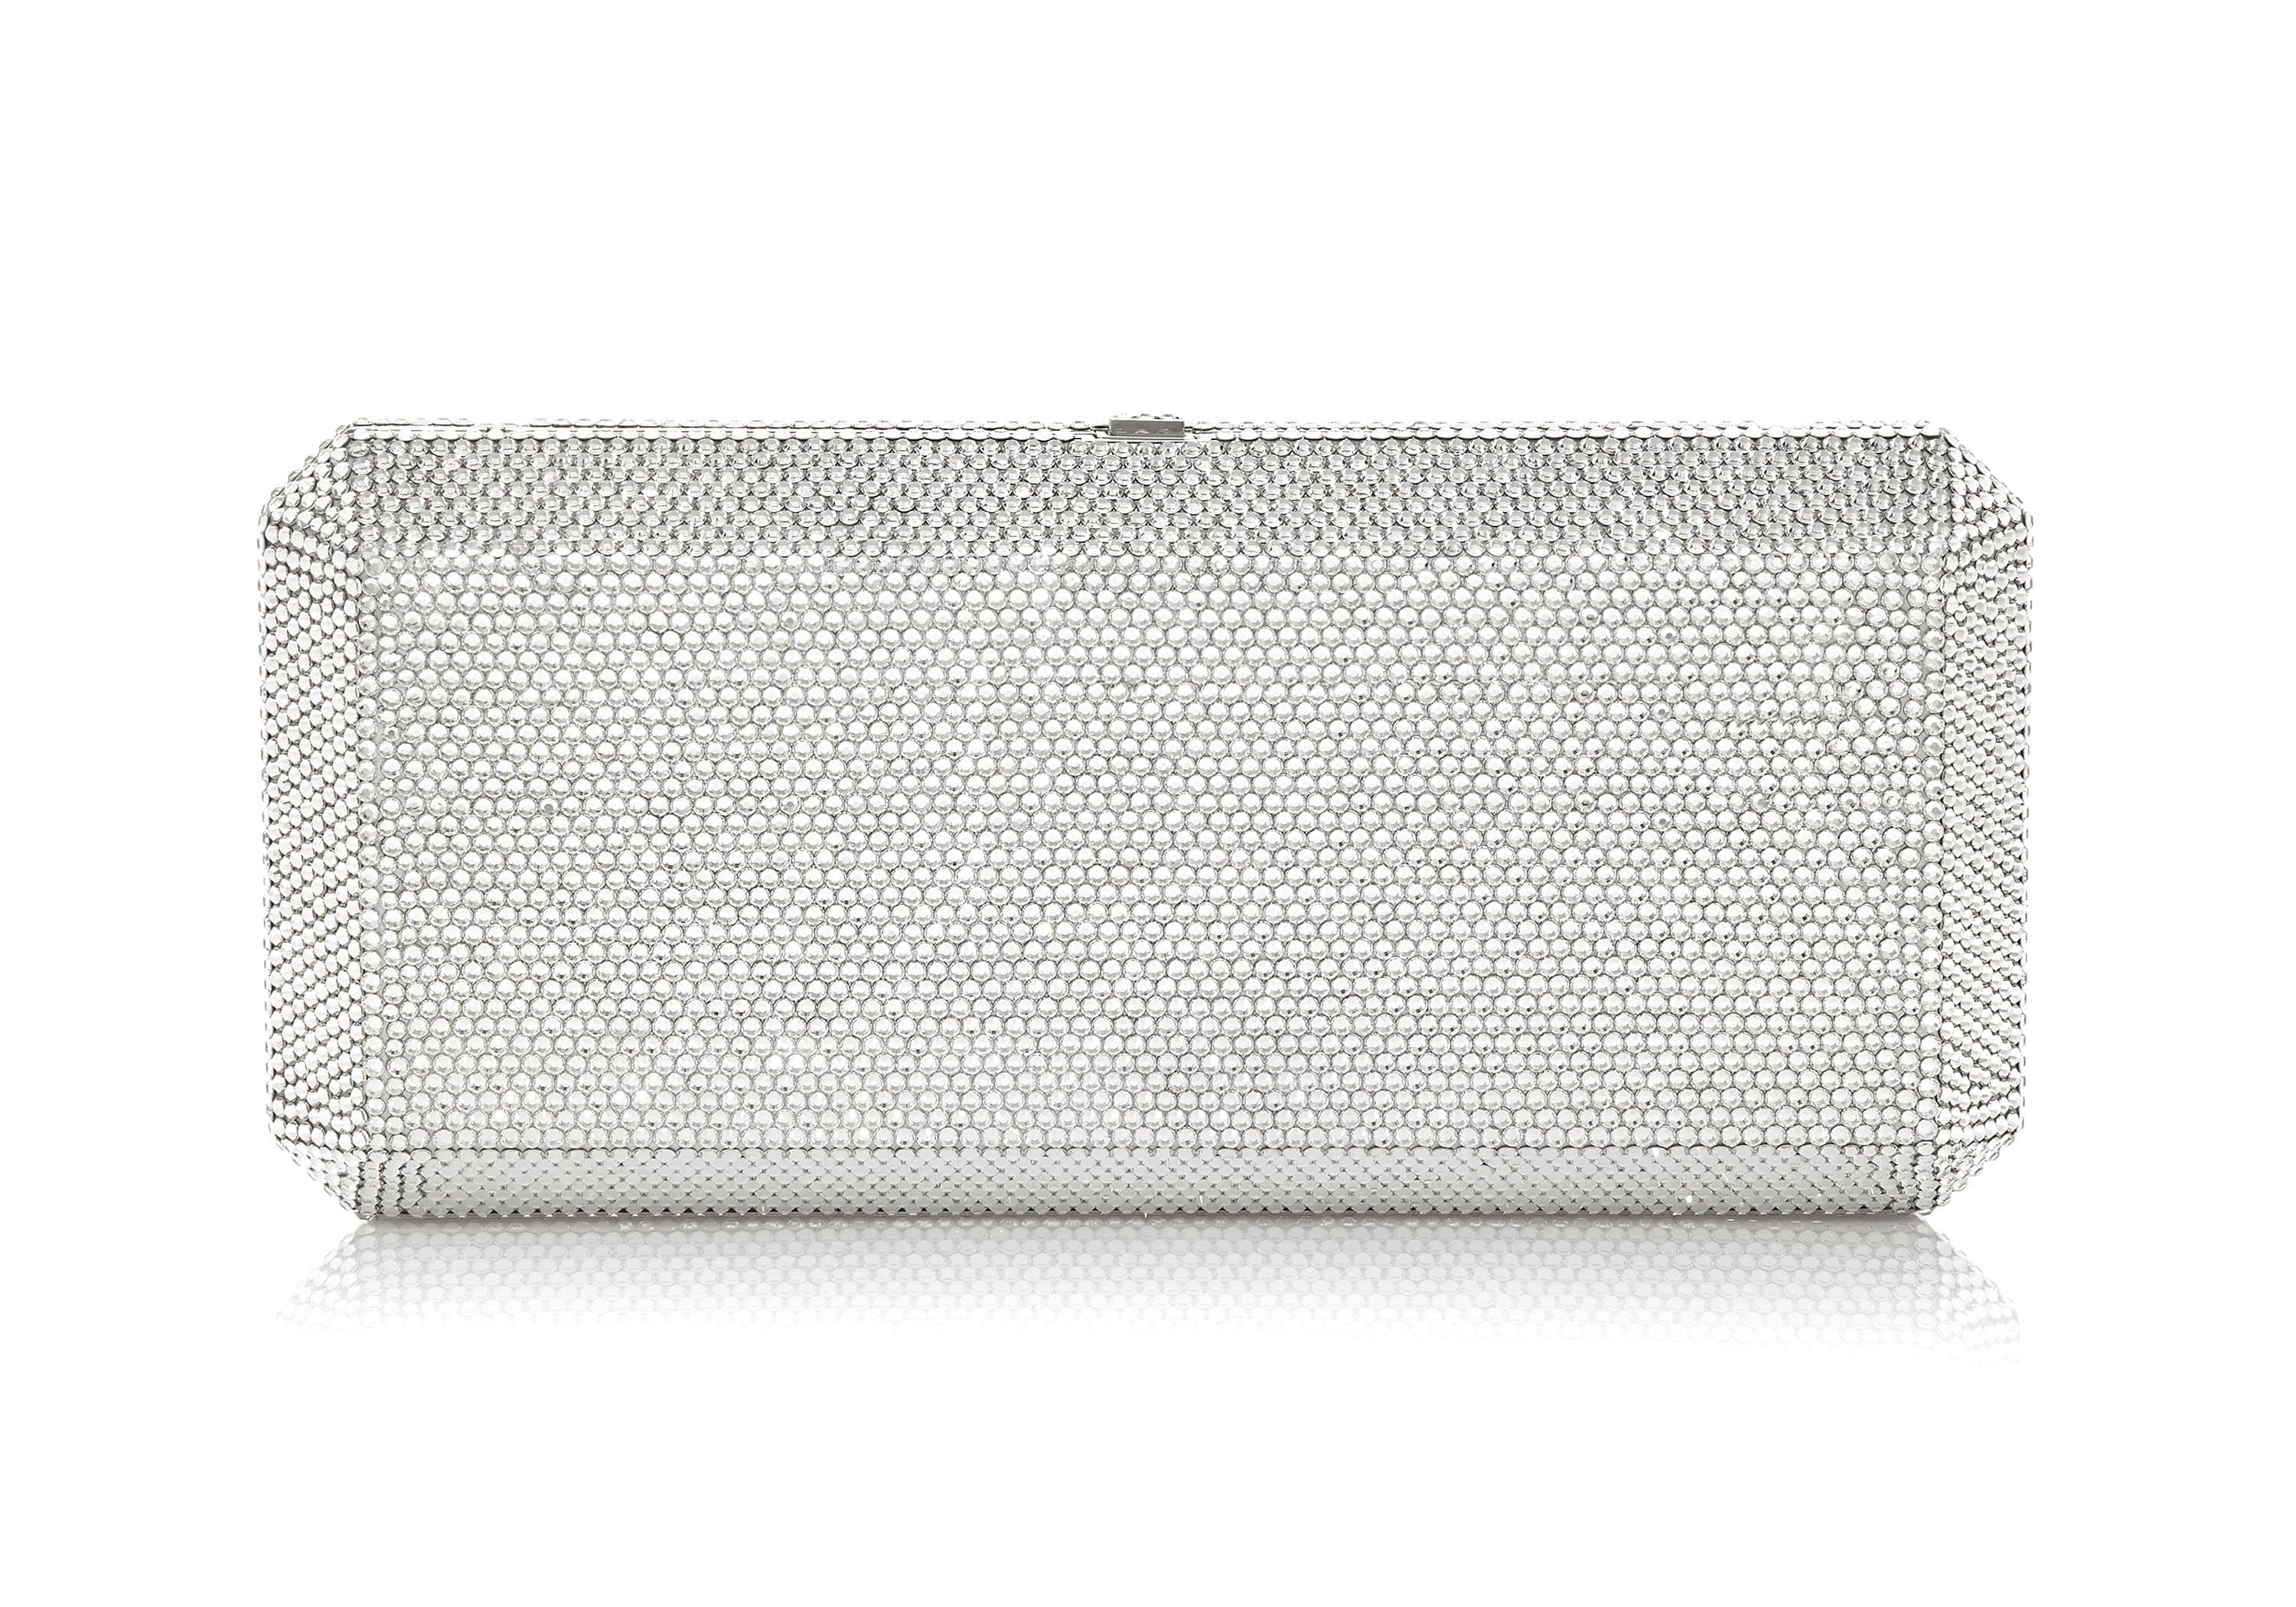 Judith Leiber Rare Early Silver Jeweled Clutch.  Luxury